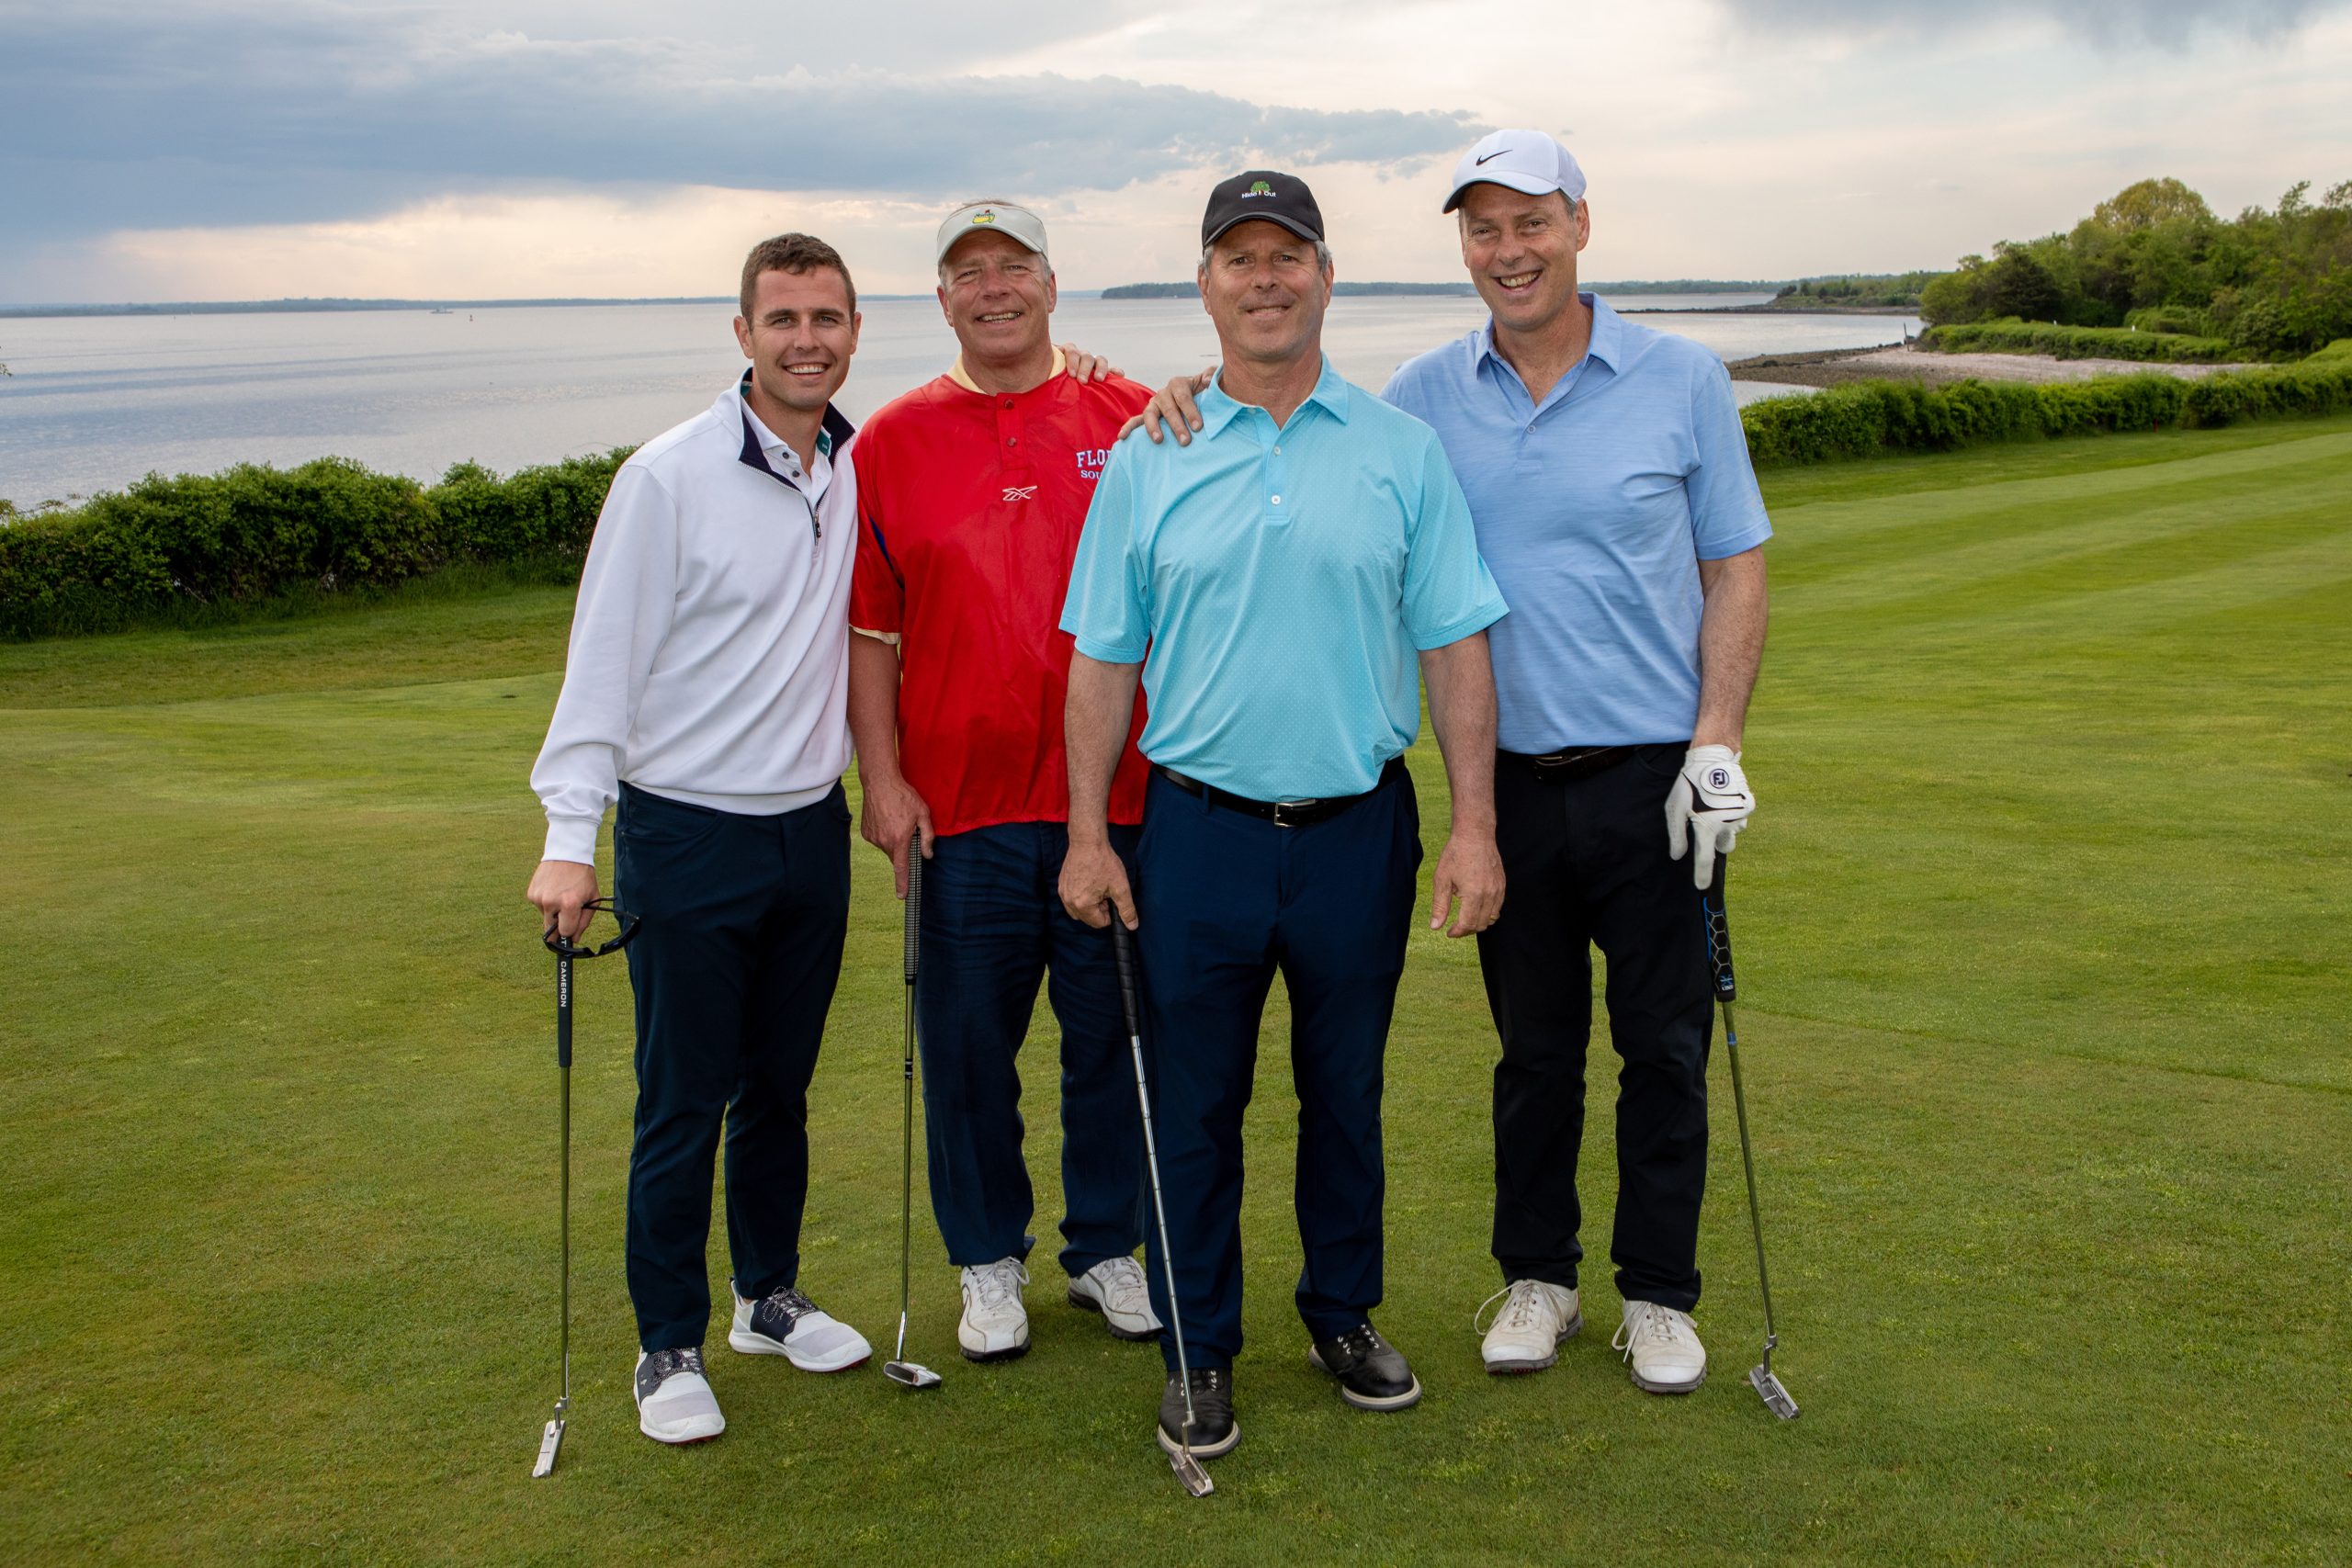 Annual Golf Tournament hosted by Newport Mental Health at The Aquidneck Club on June 17